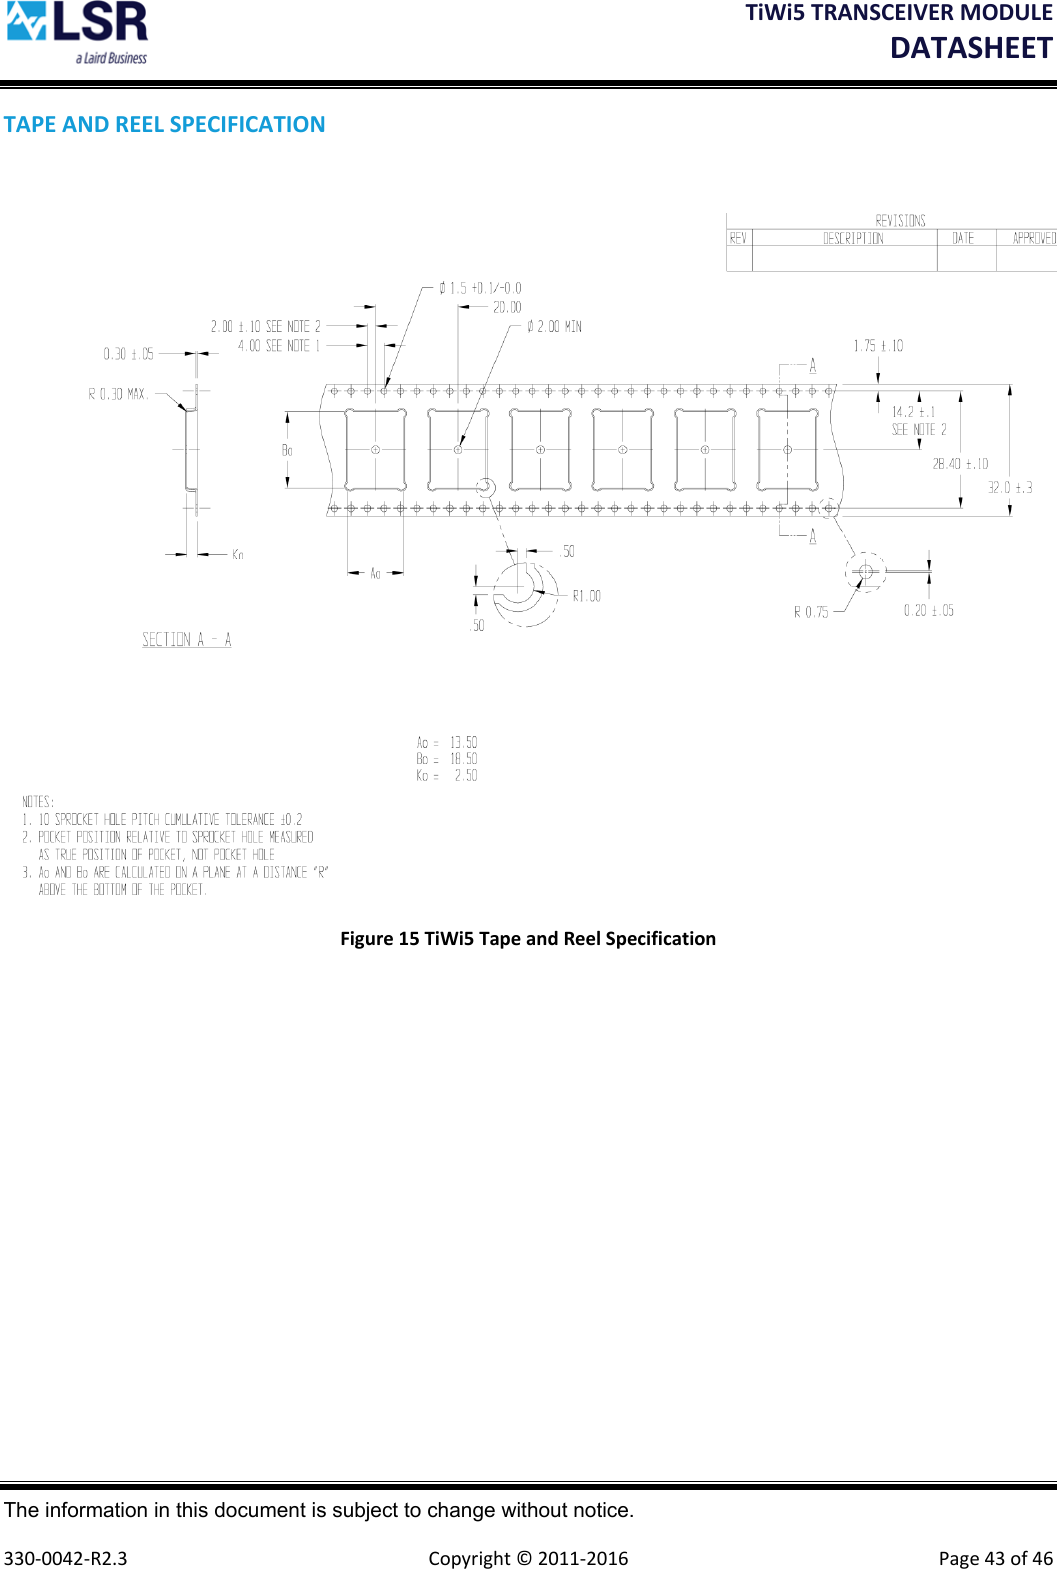 TiWi5TRANSCEIVERMODULEDATASHEET The information in this document is subject to change without notice.  330‐0042‐R2.3  Copyright©2011‐2016 Page43of46TAPEANDREELSPECIFICATIONFigure15TiWi5TapeandReelSpecification